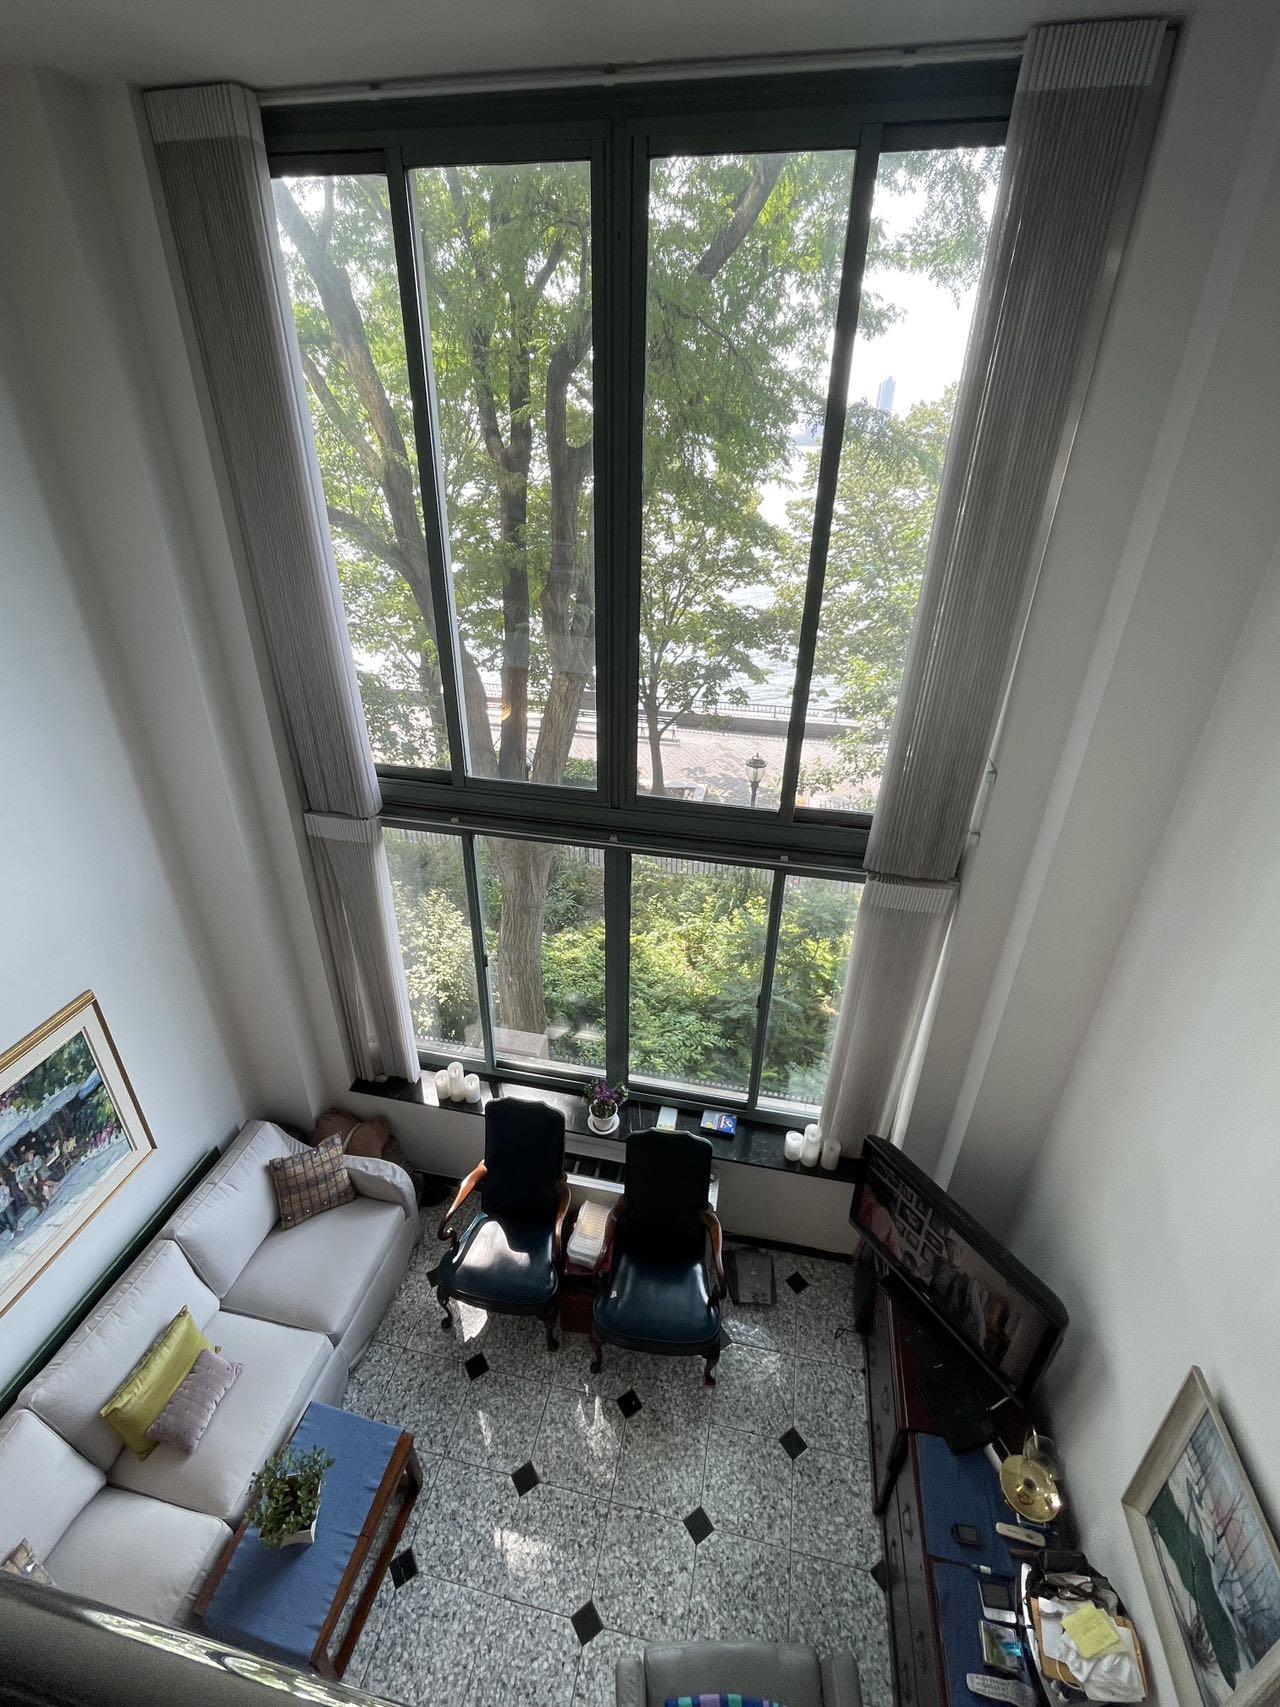 21 South End Avenue 214, Battery Park City, Downtown, NYC - 1 Bedrooms  
1.5 Bathrooms  
3 Rooms - 